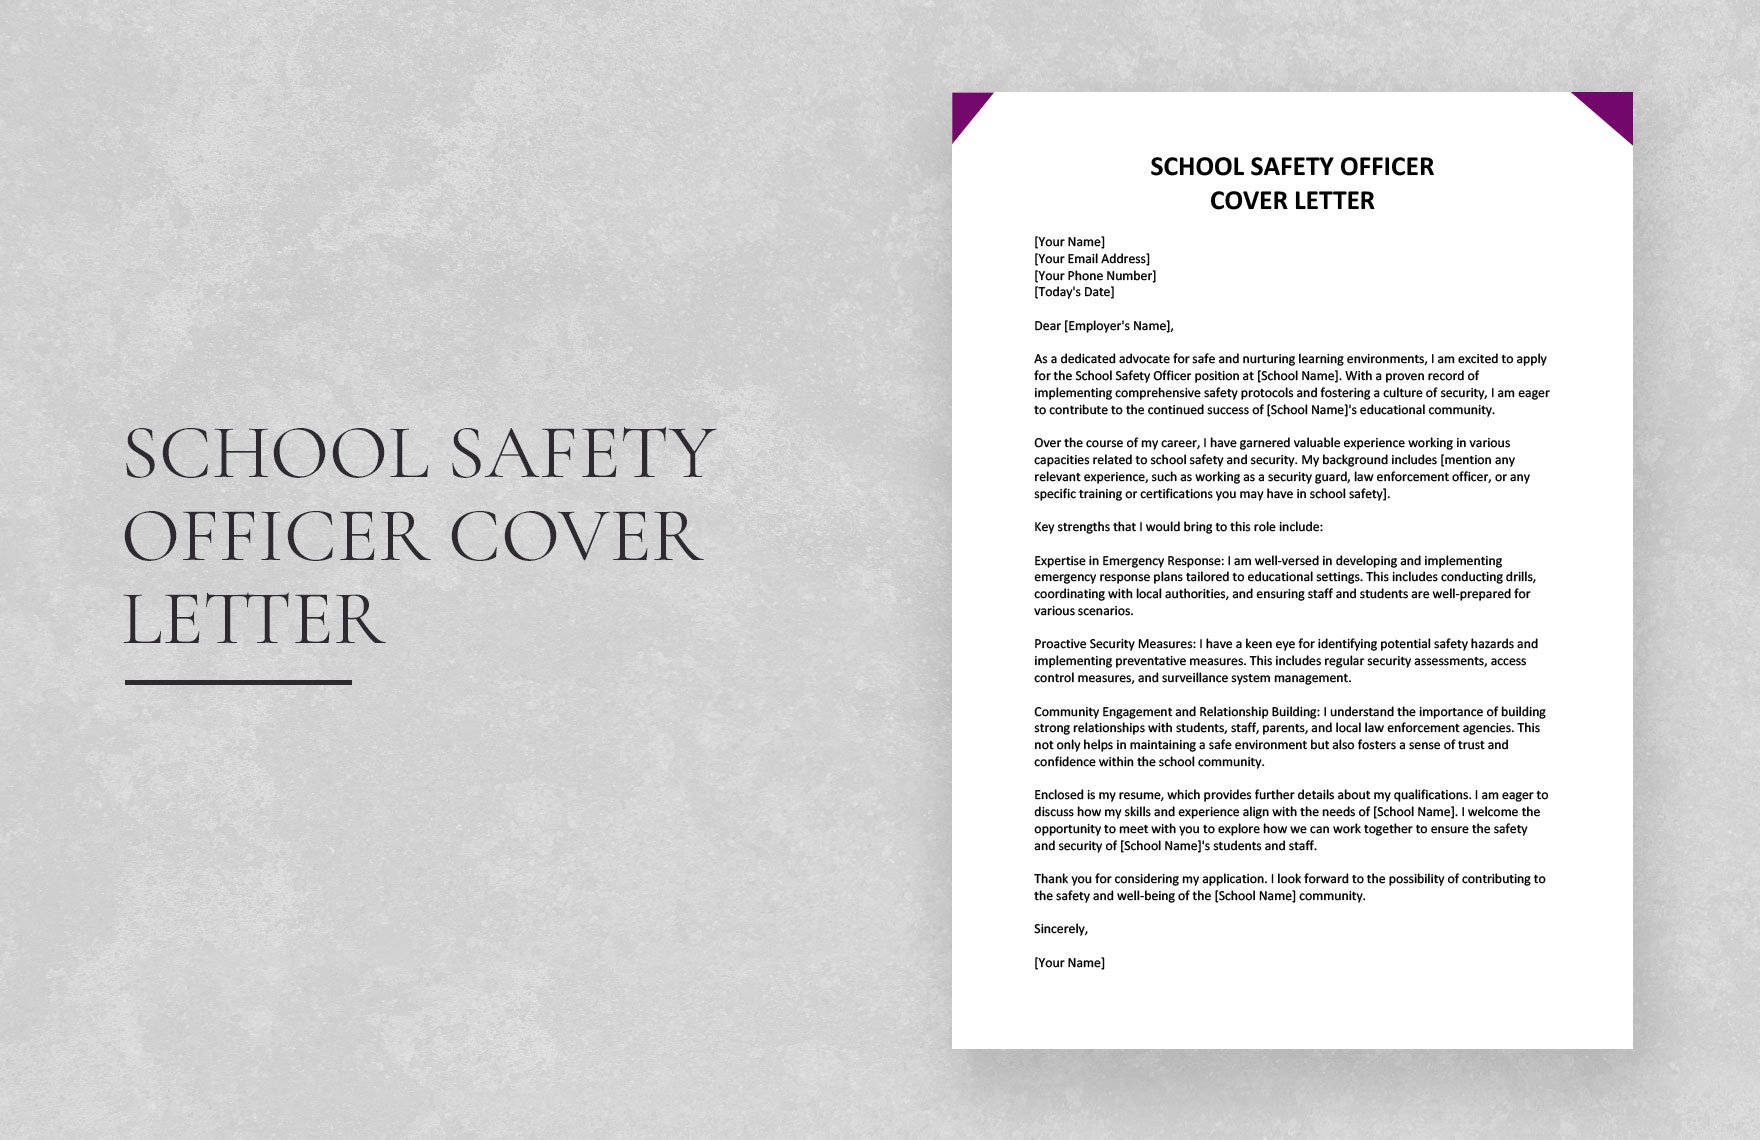 School Safety Officer Cover Letter in Word, Google Docs Download